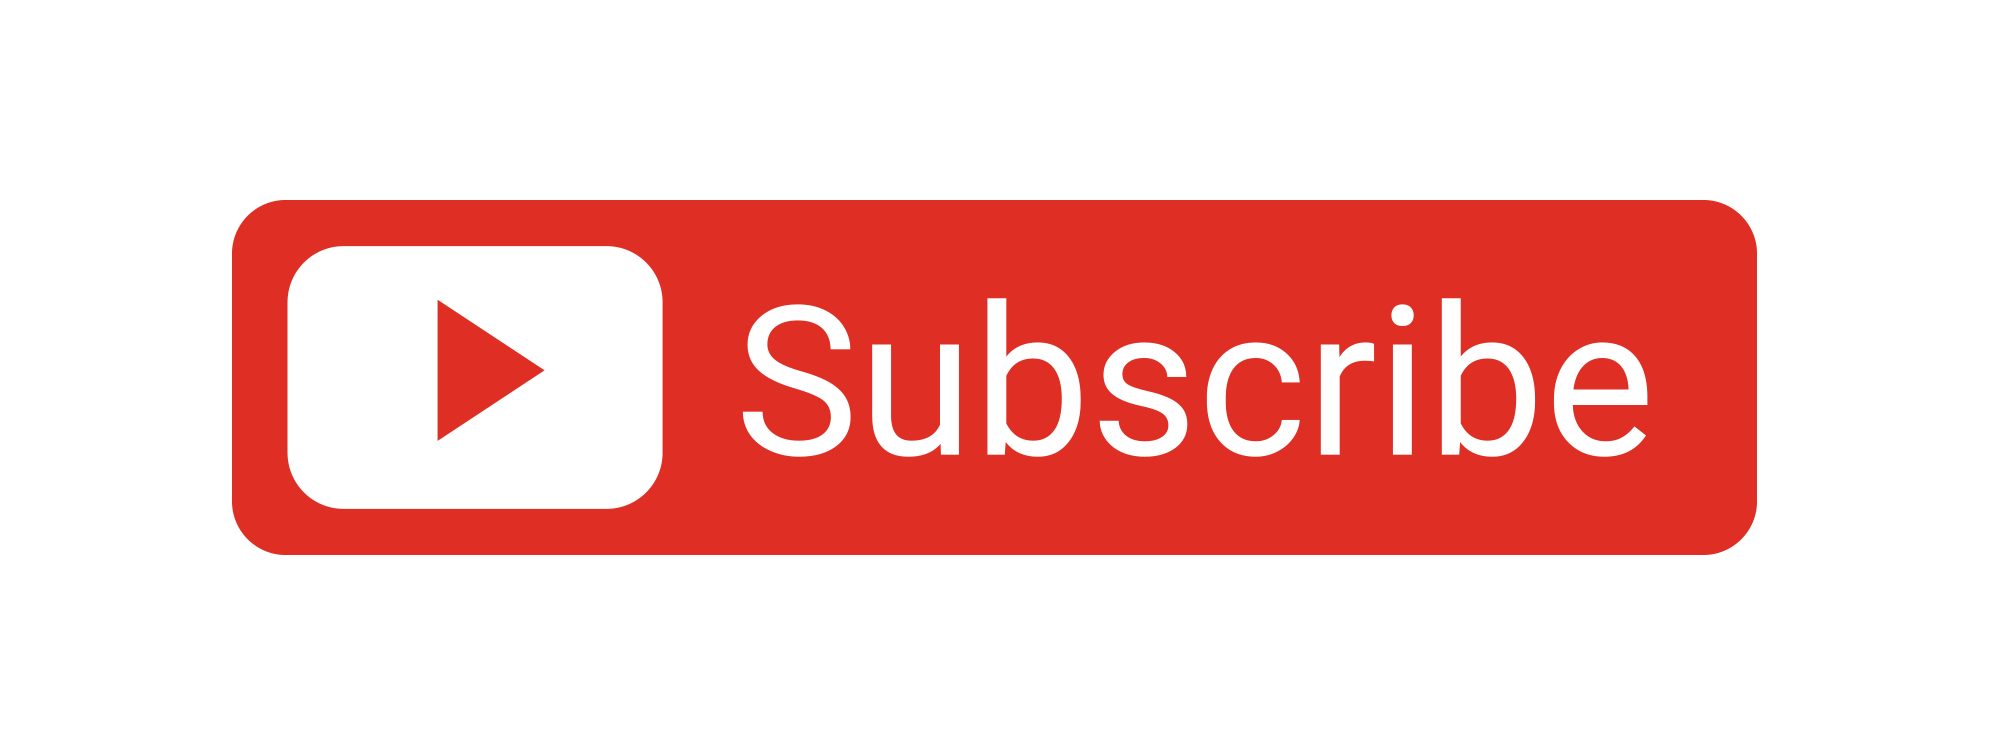 youtube subscribe button png free download